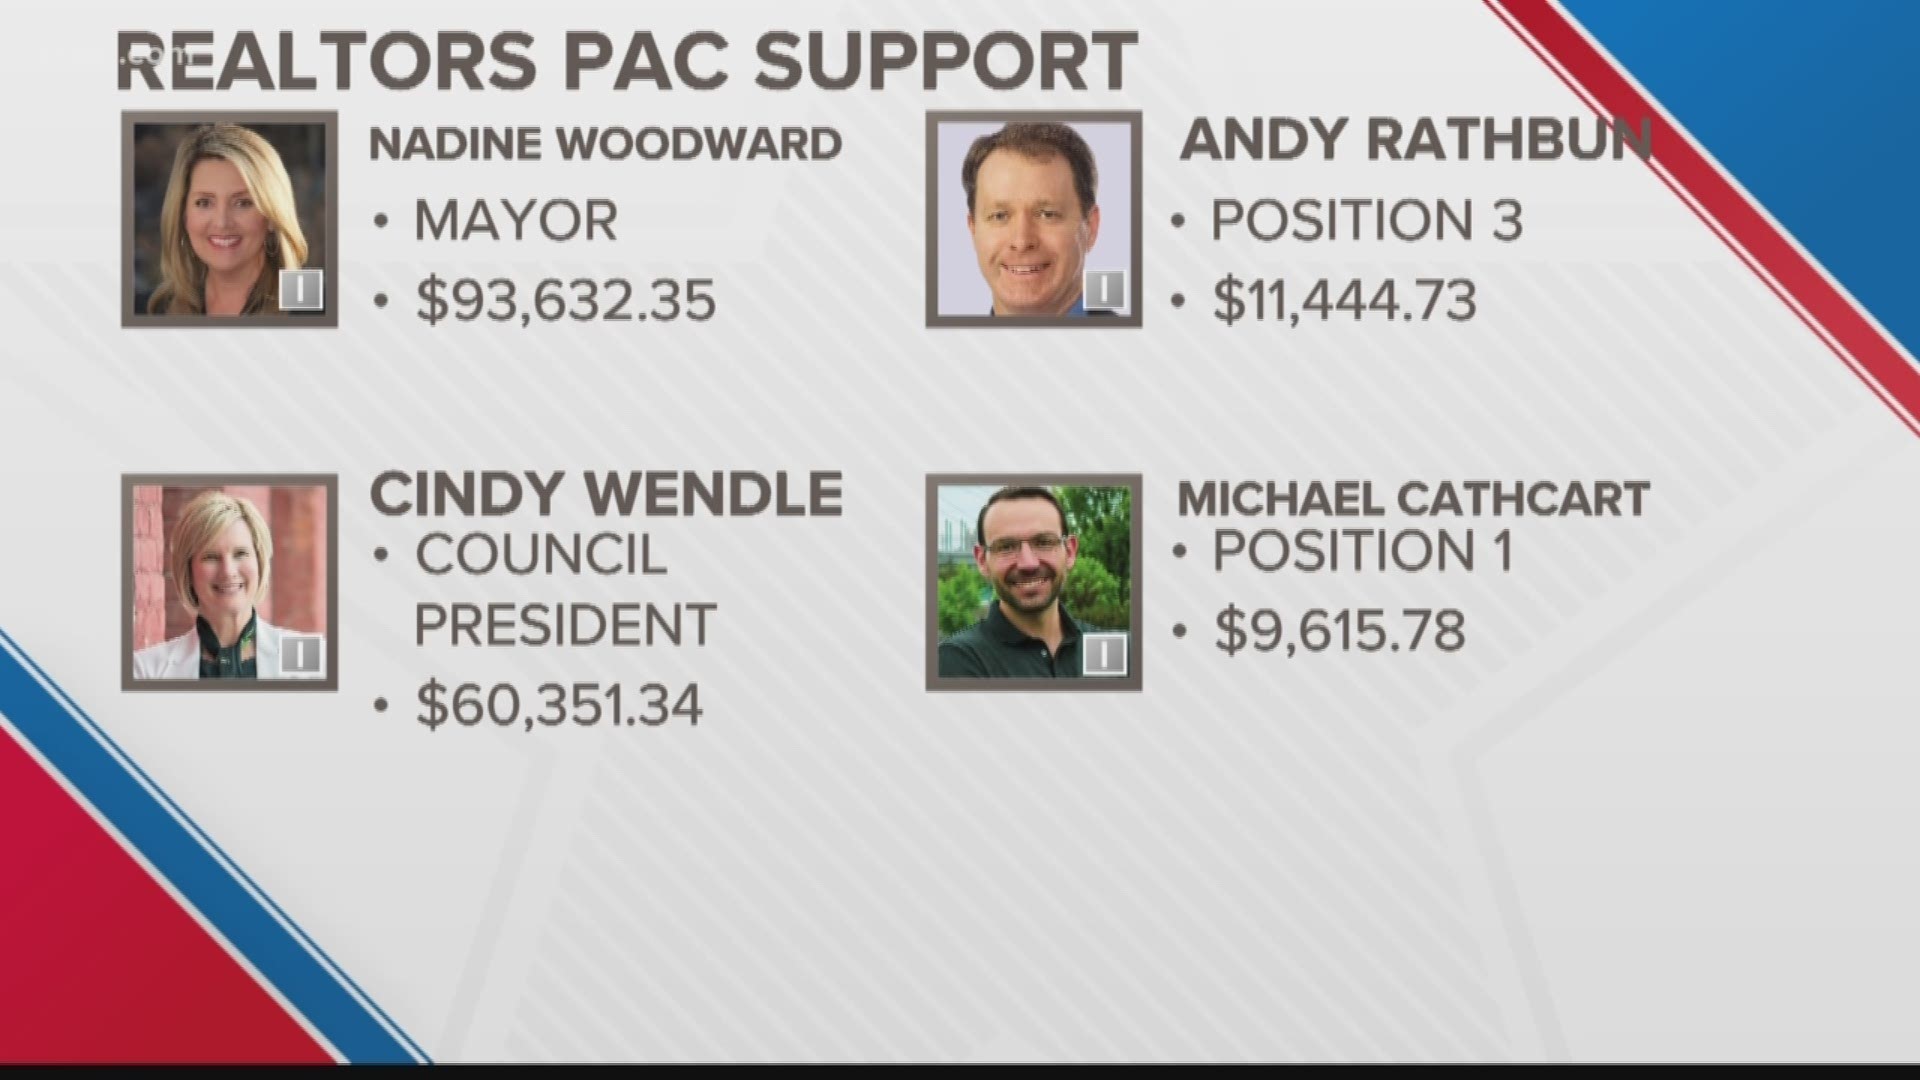 PACs are buying ads for a variety of the 2019 candidates in Spokane, spending money at a rare pace.